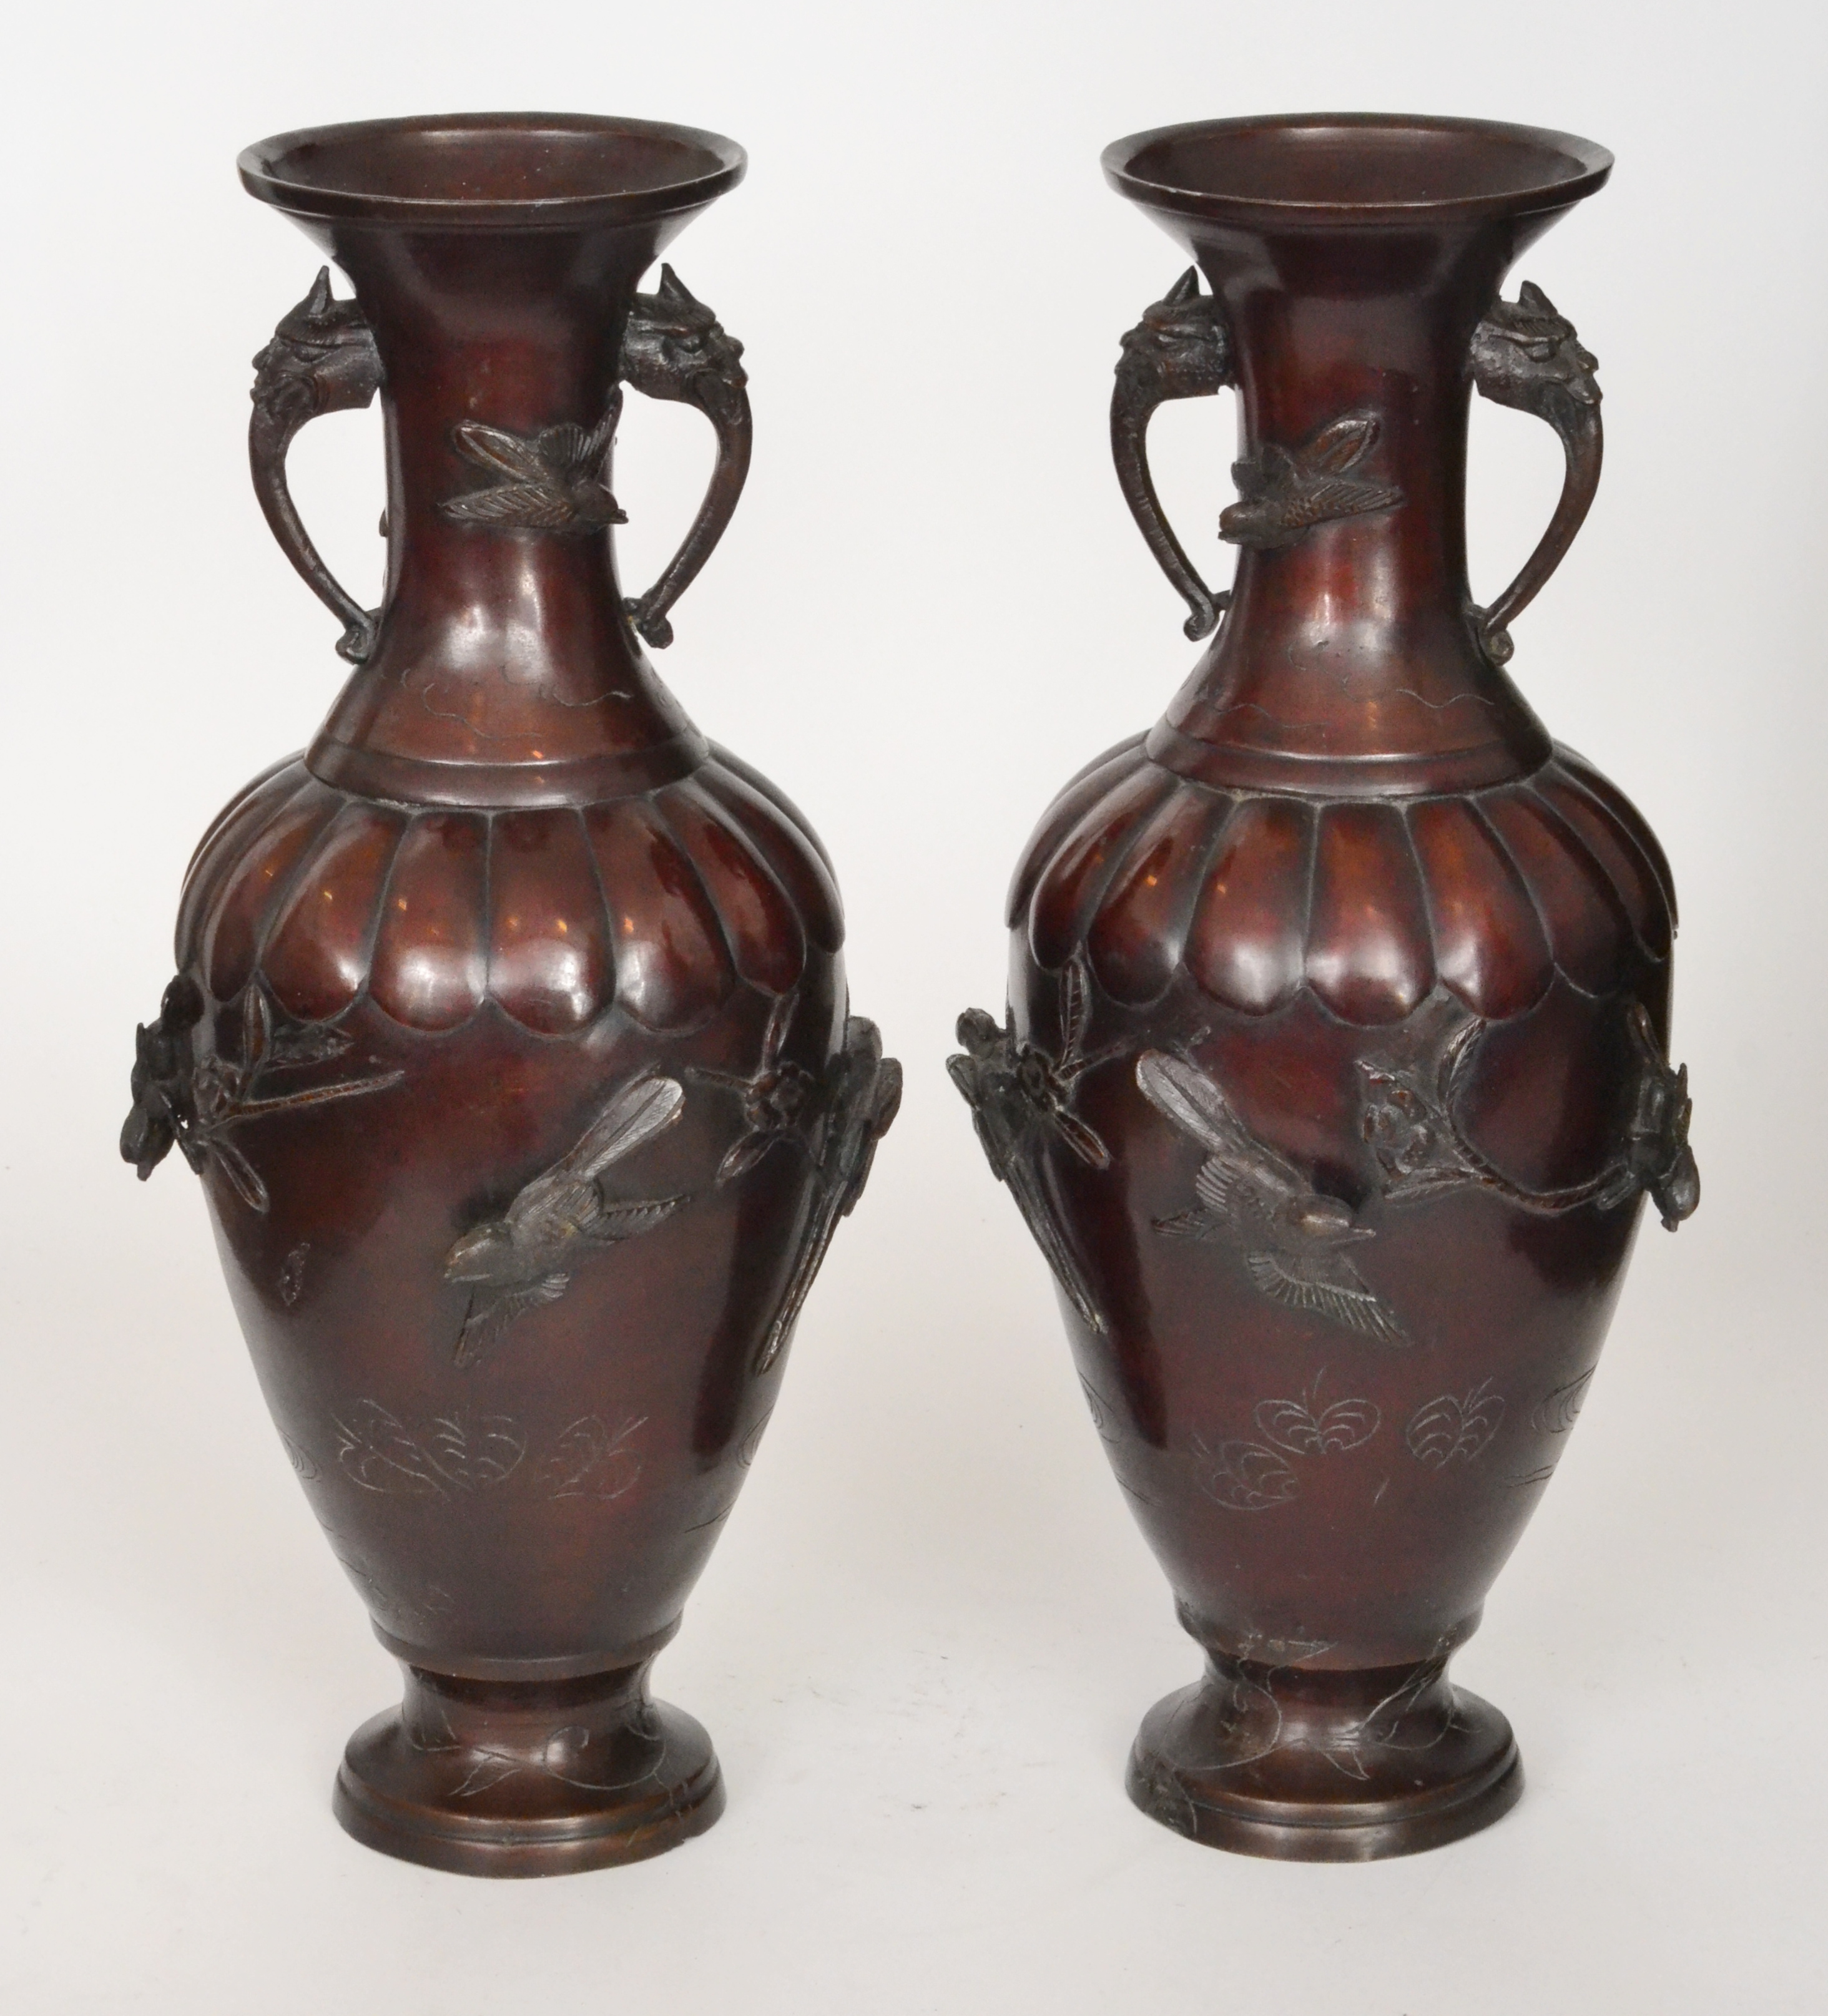 A pair of Meiji period bronze baluster twin handled vases each decorated with relief moulded birds